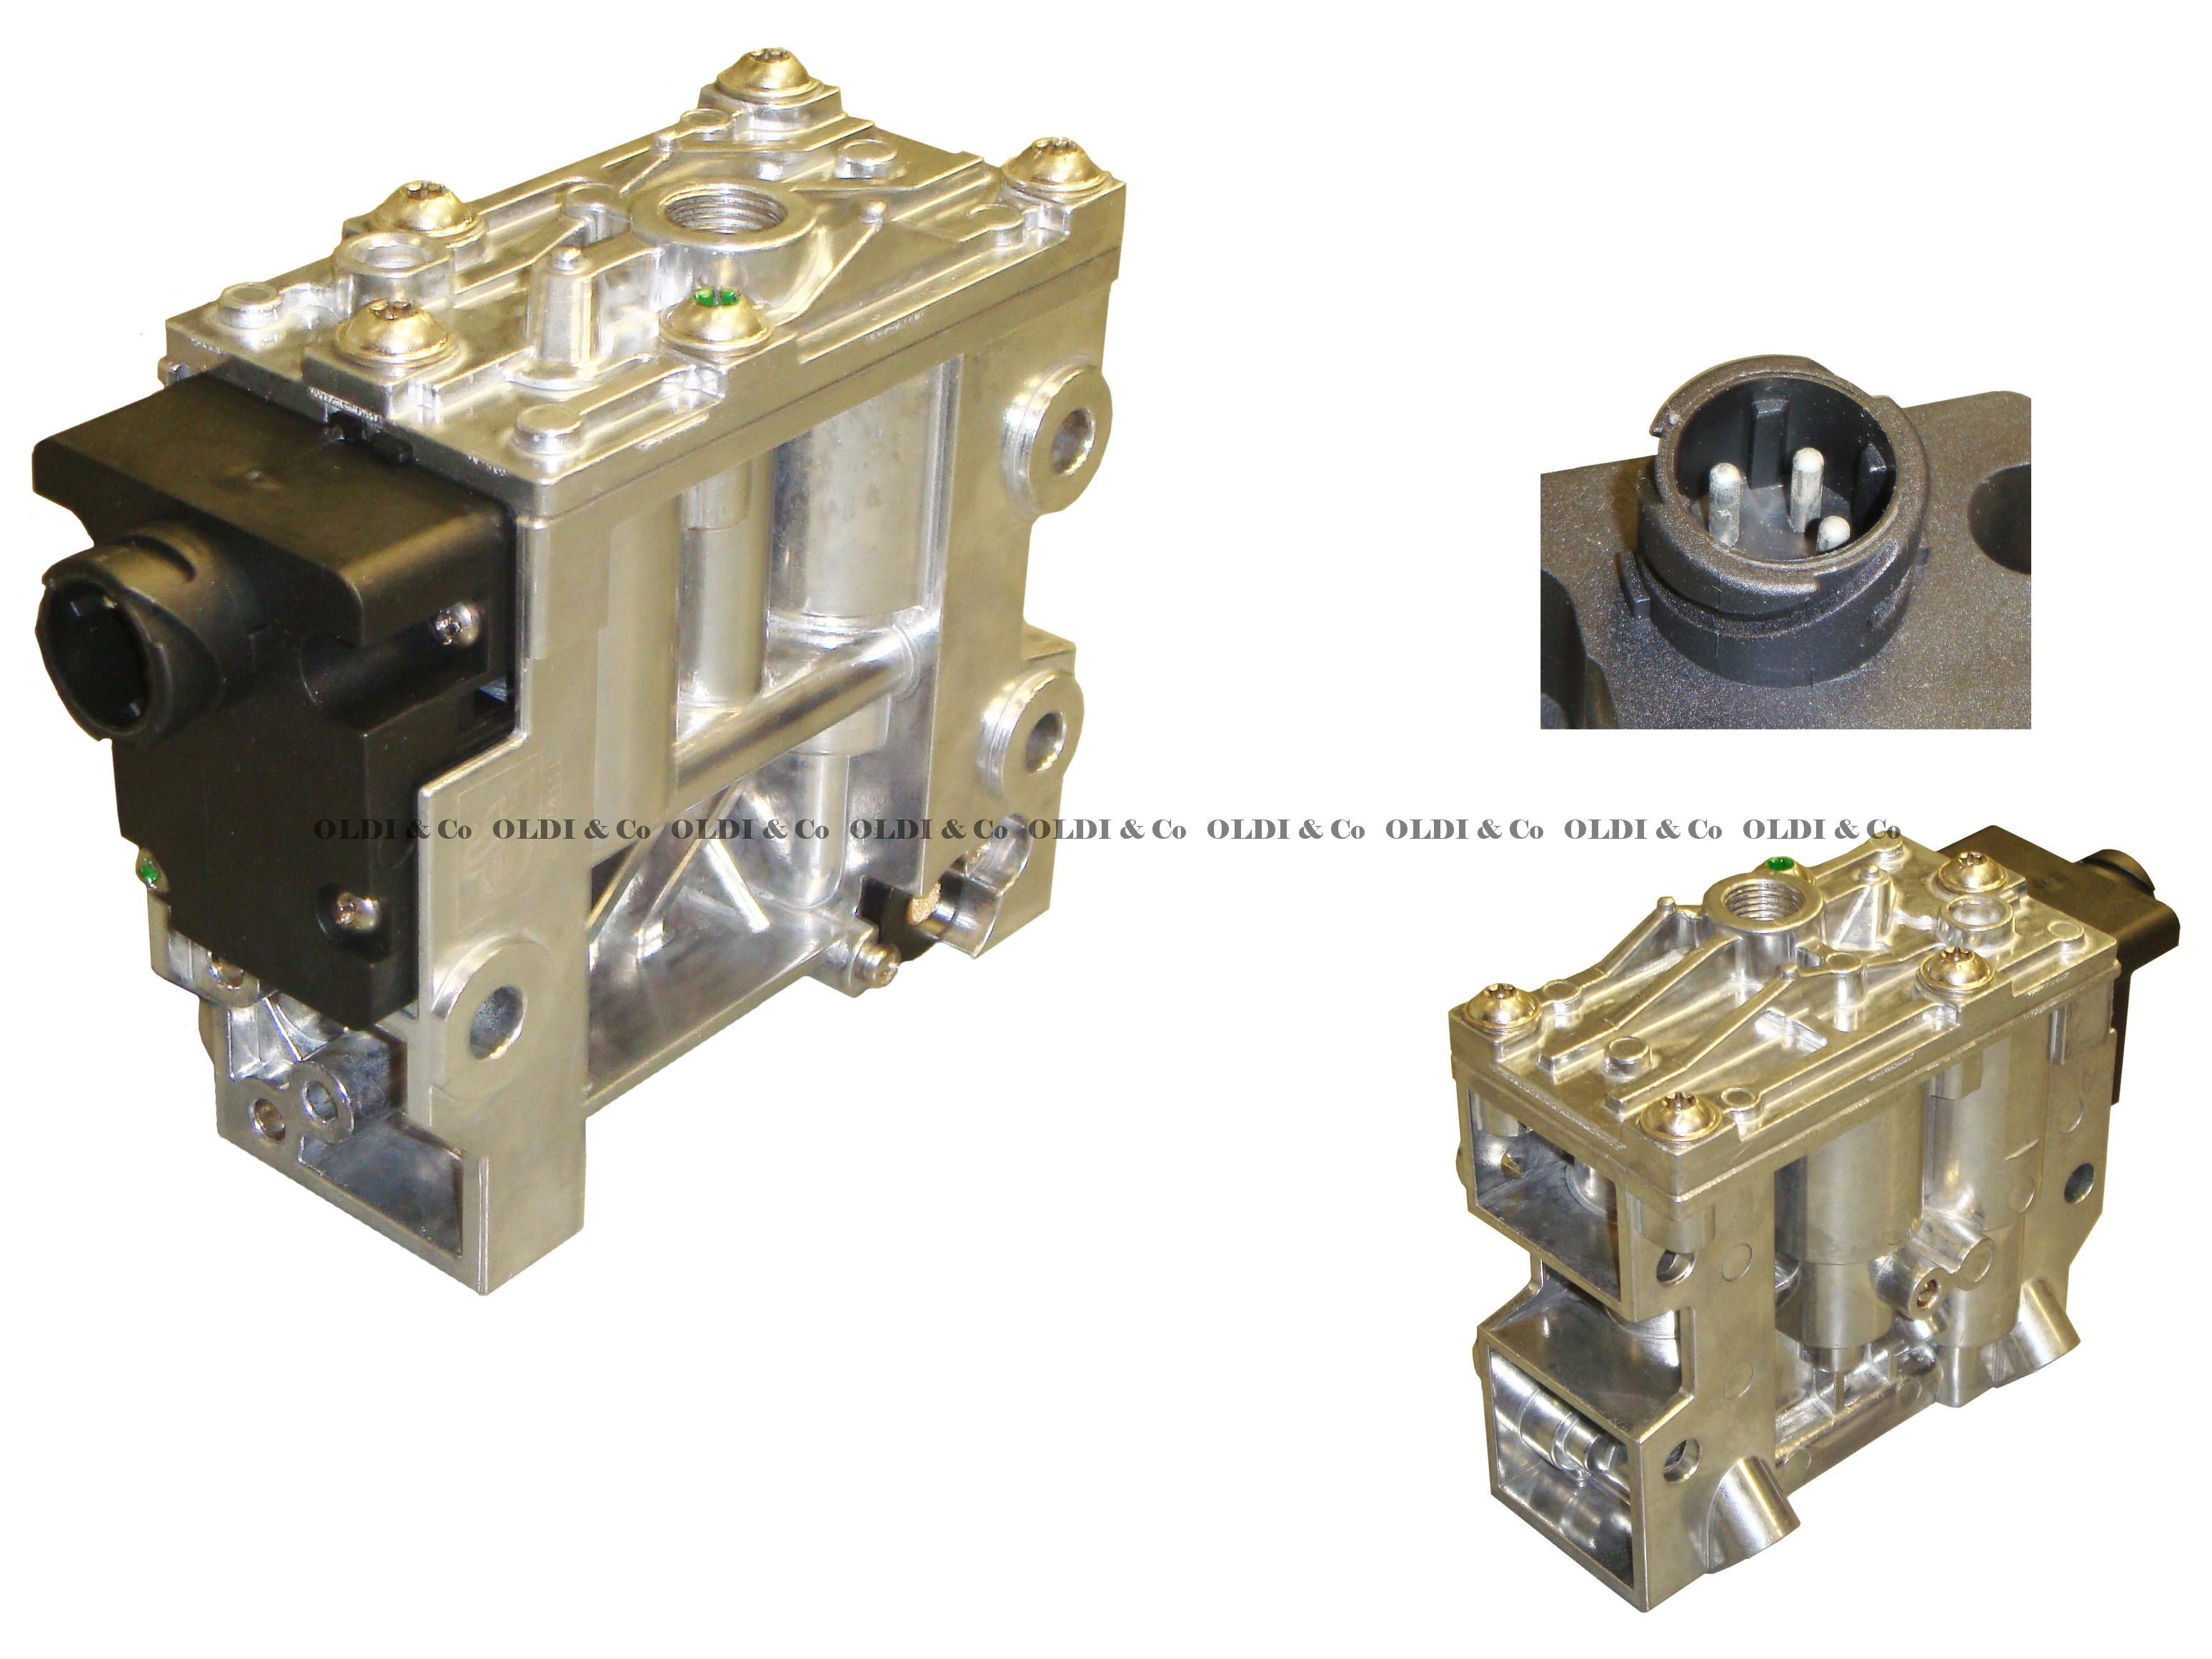 23.041.04942 Compressors and their components → Solenoid valve